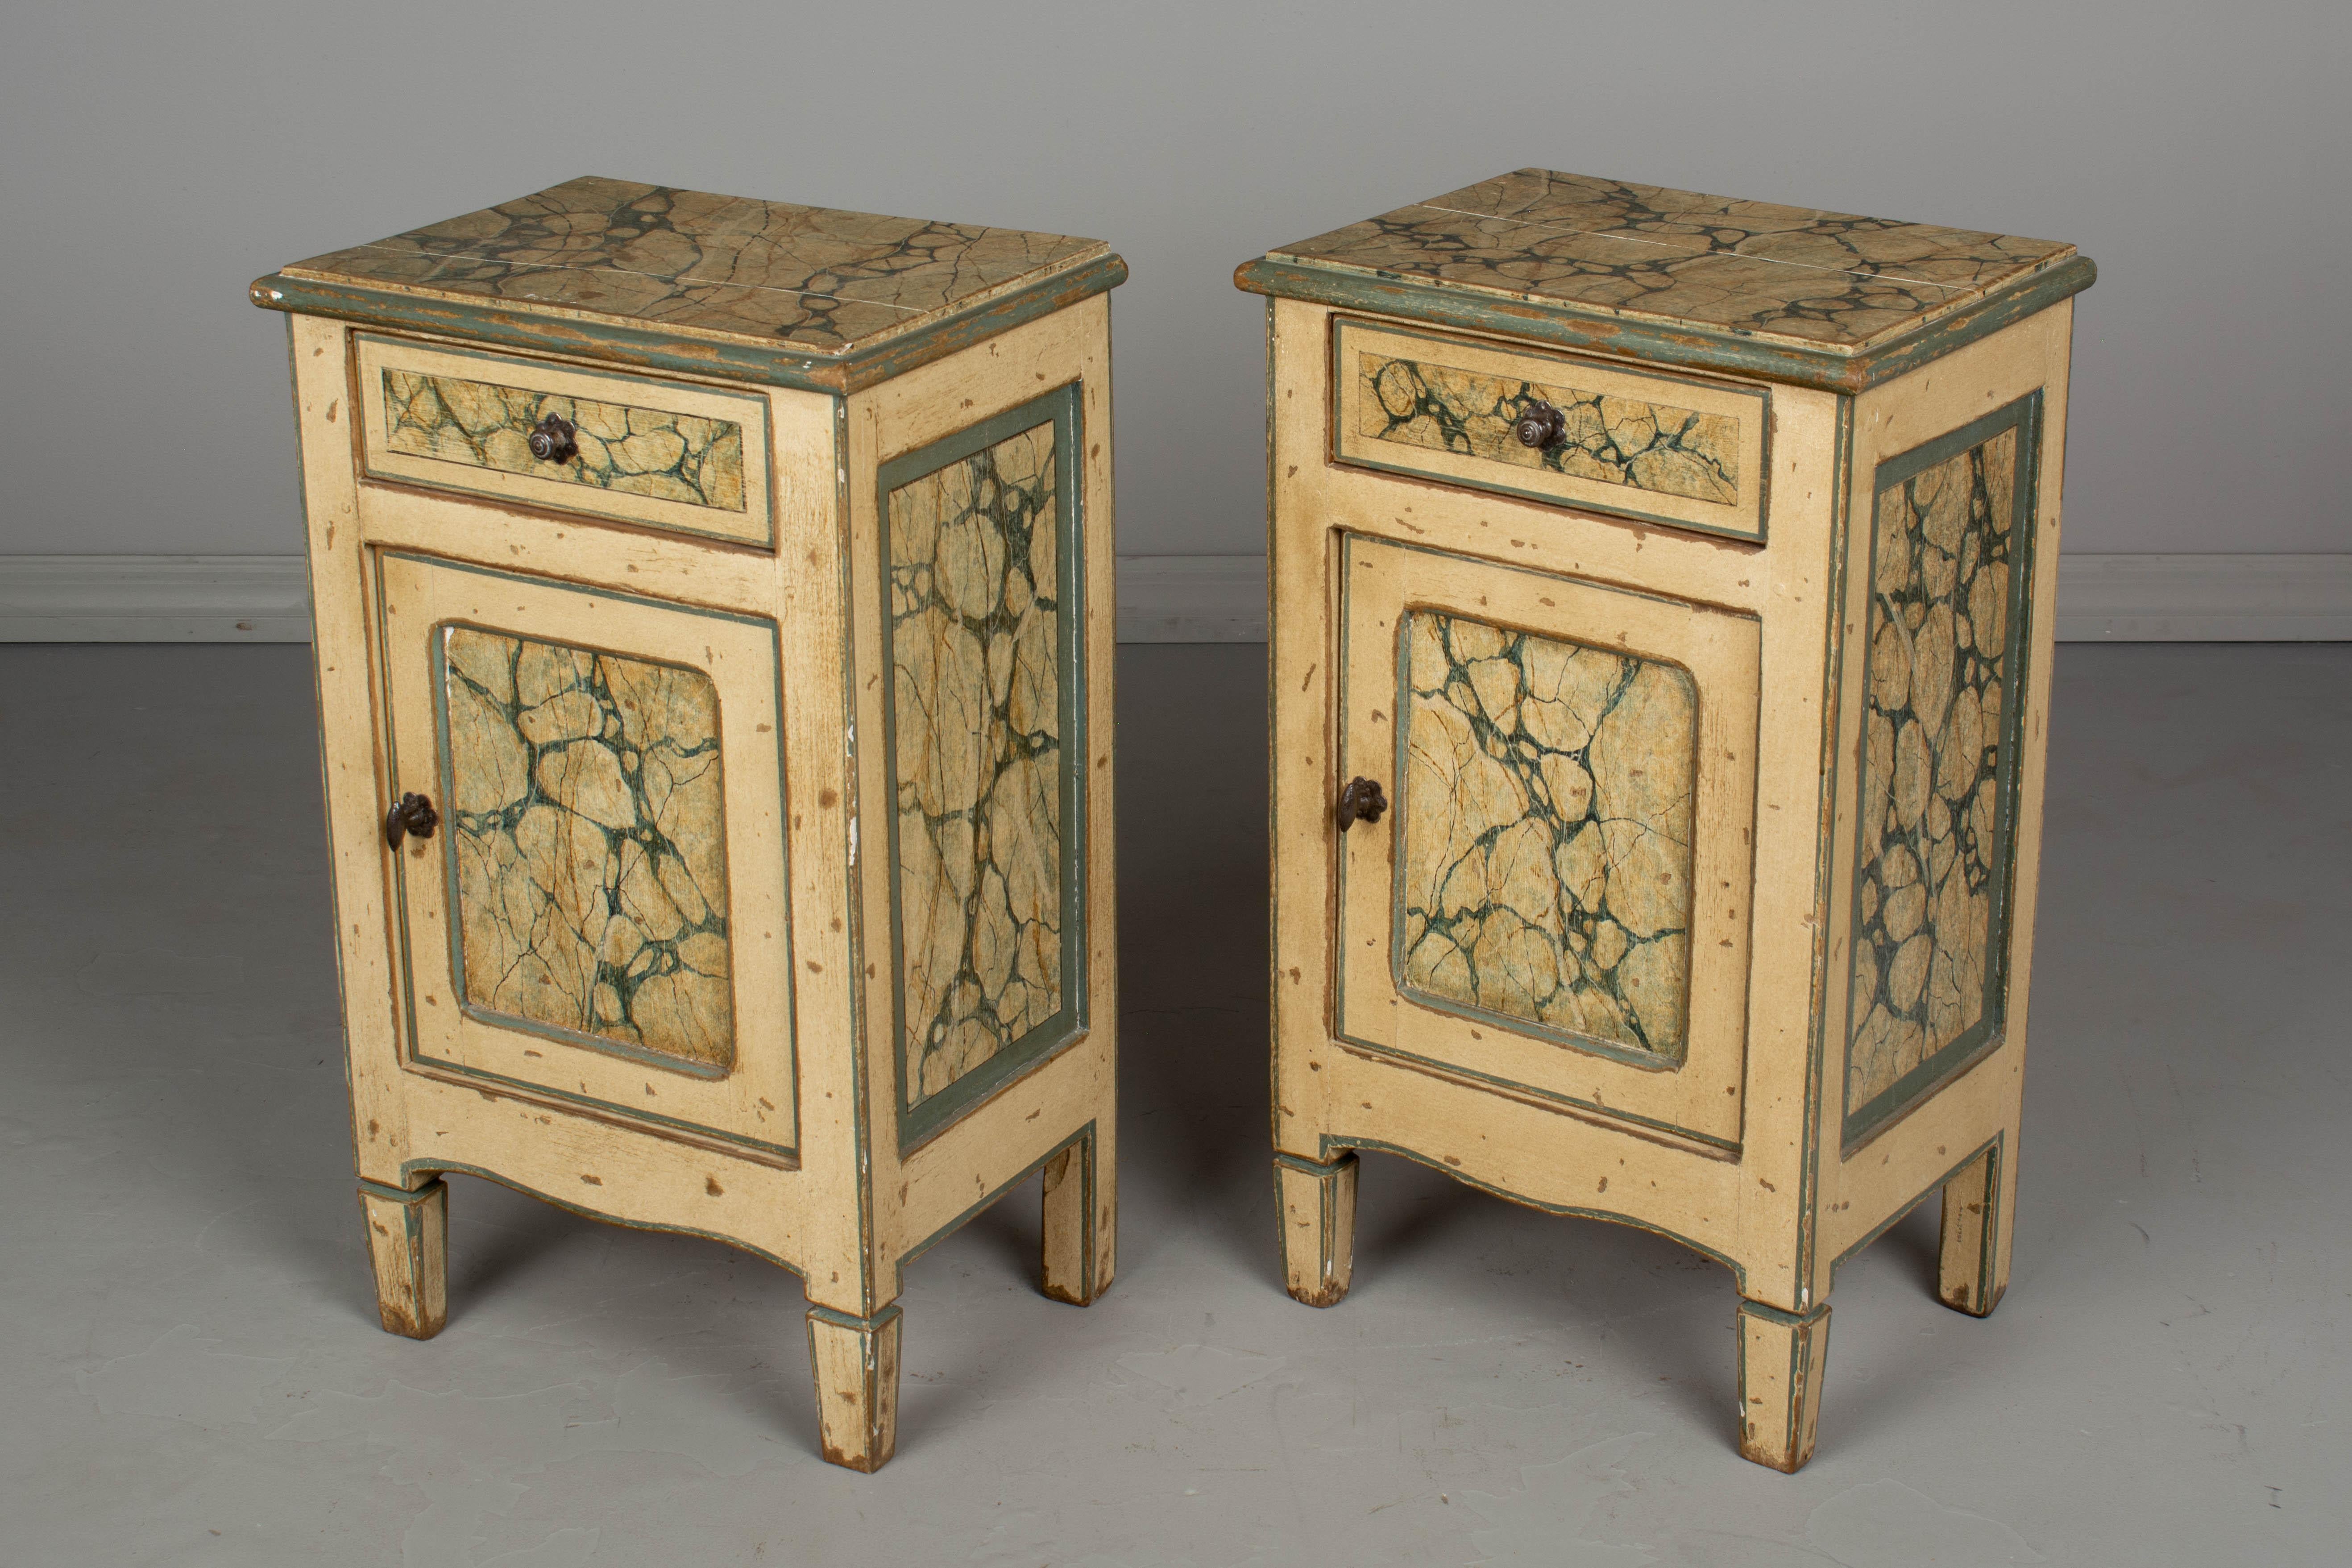 A pair of Italian Florentine style faux marble painted nightstands, or side tables. Made of pine, with a drawer above a cabinet door. In good condition, sturdy and well-crafted. Nice patina with minor paint loss. Please refer to photos for more